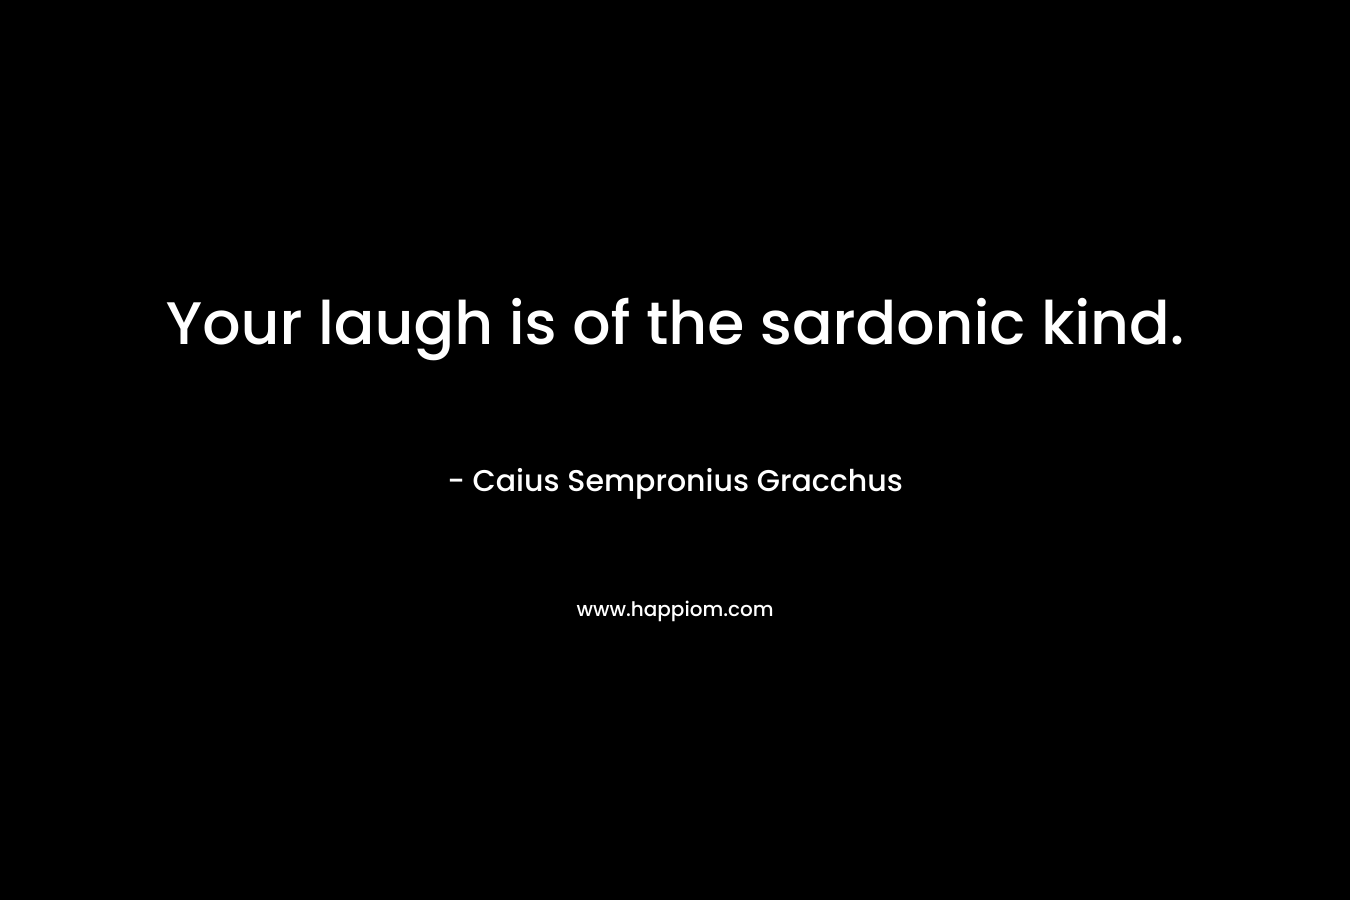 Your laugh is of the sardonic kind.